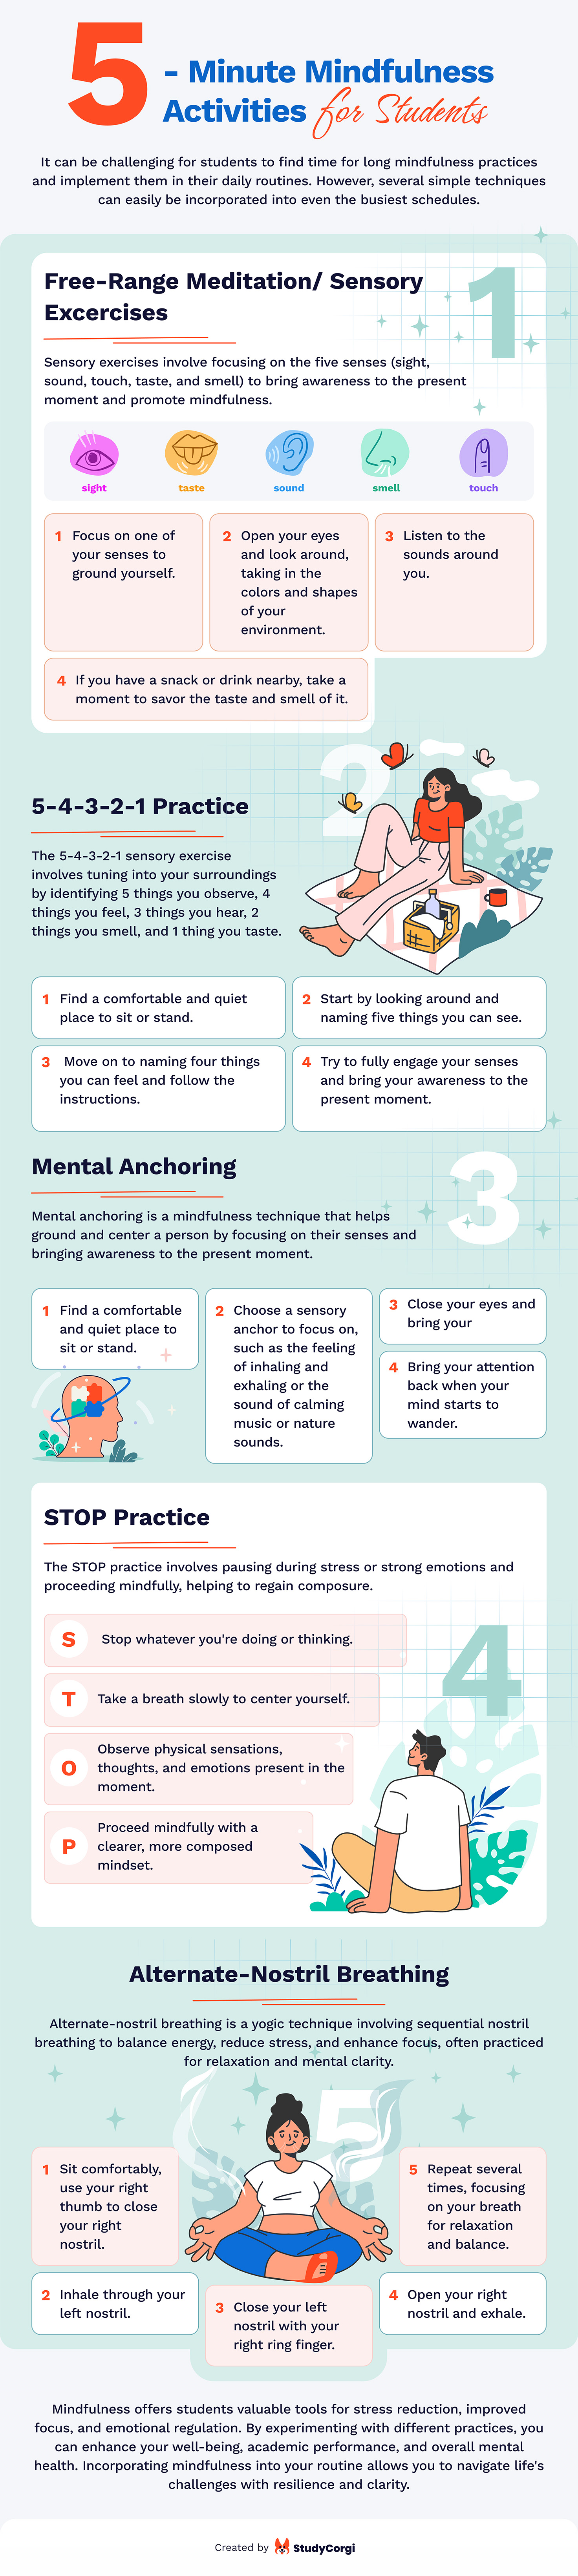 The infographic offers the most efficient 5-minute activities to calm your mind and boost productivity.